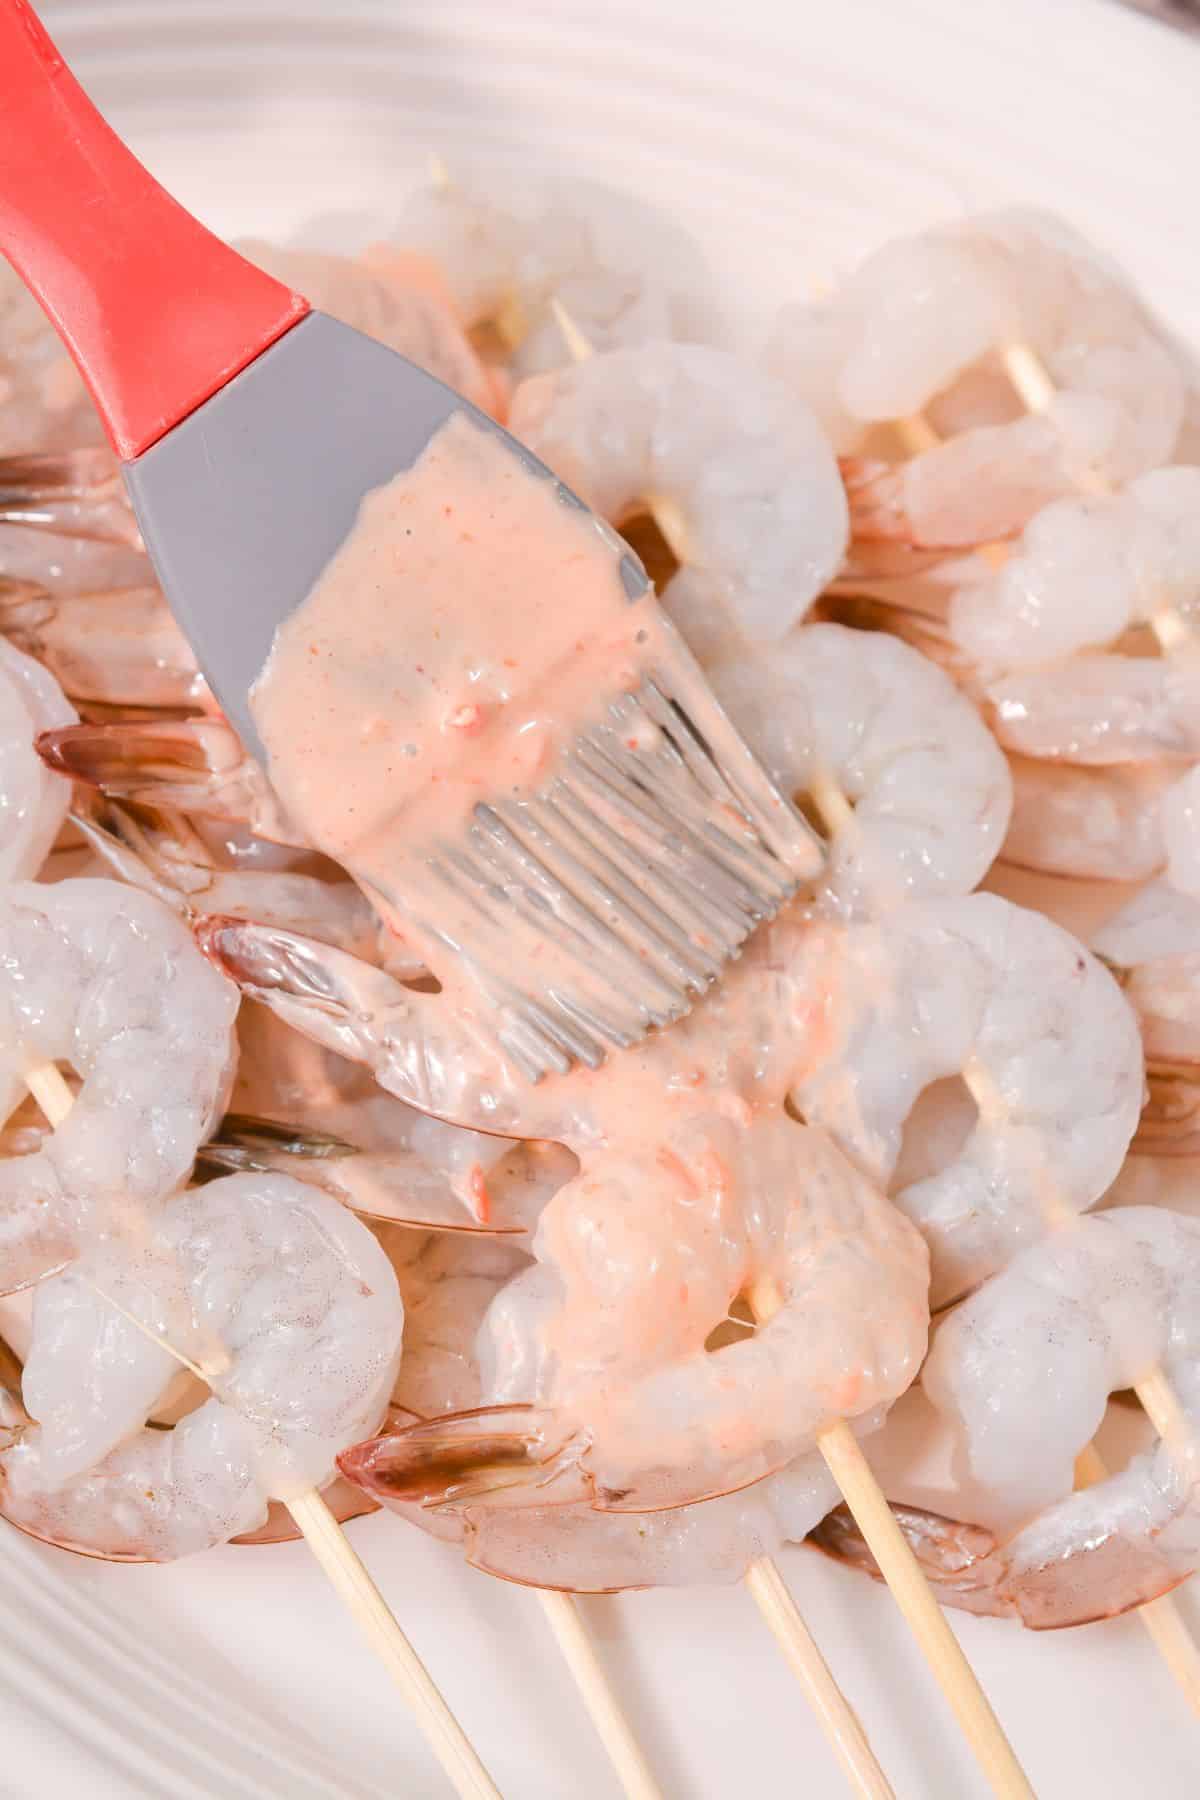 a brush being used to put sauce on the shrimp